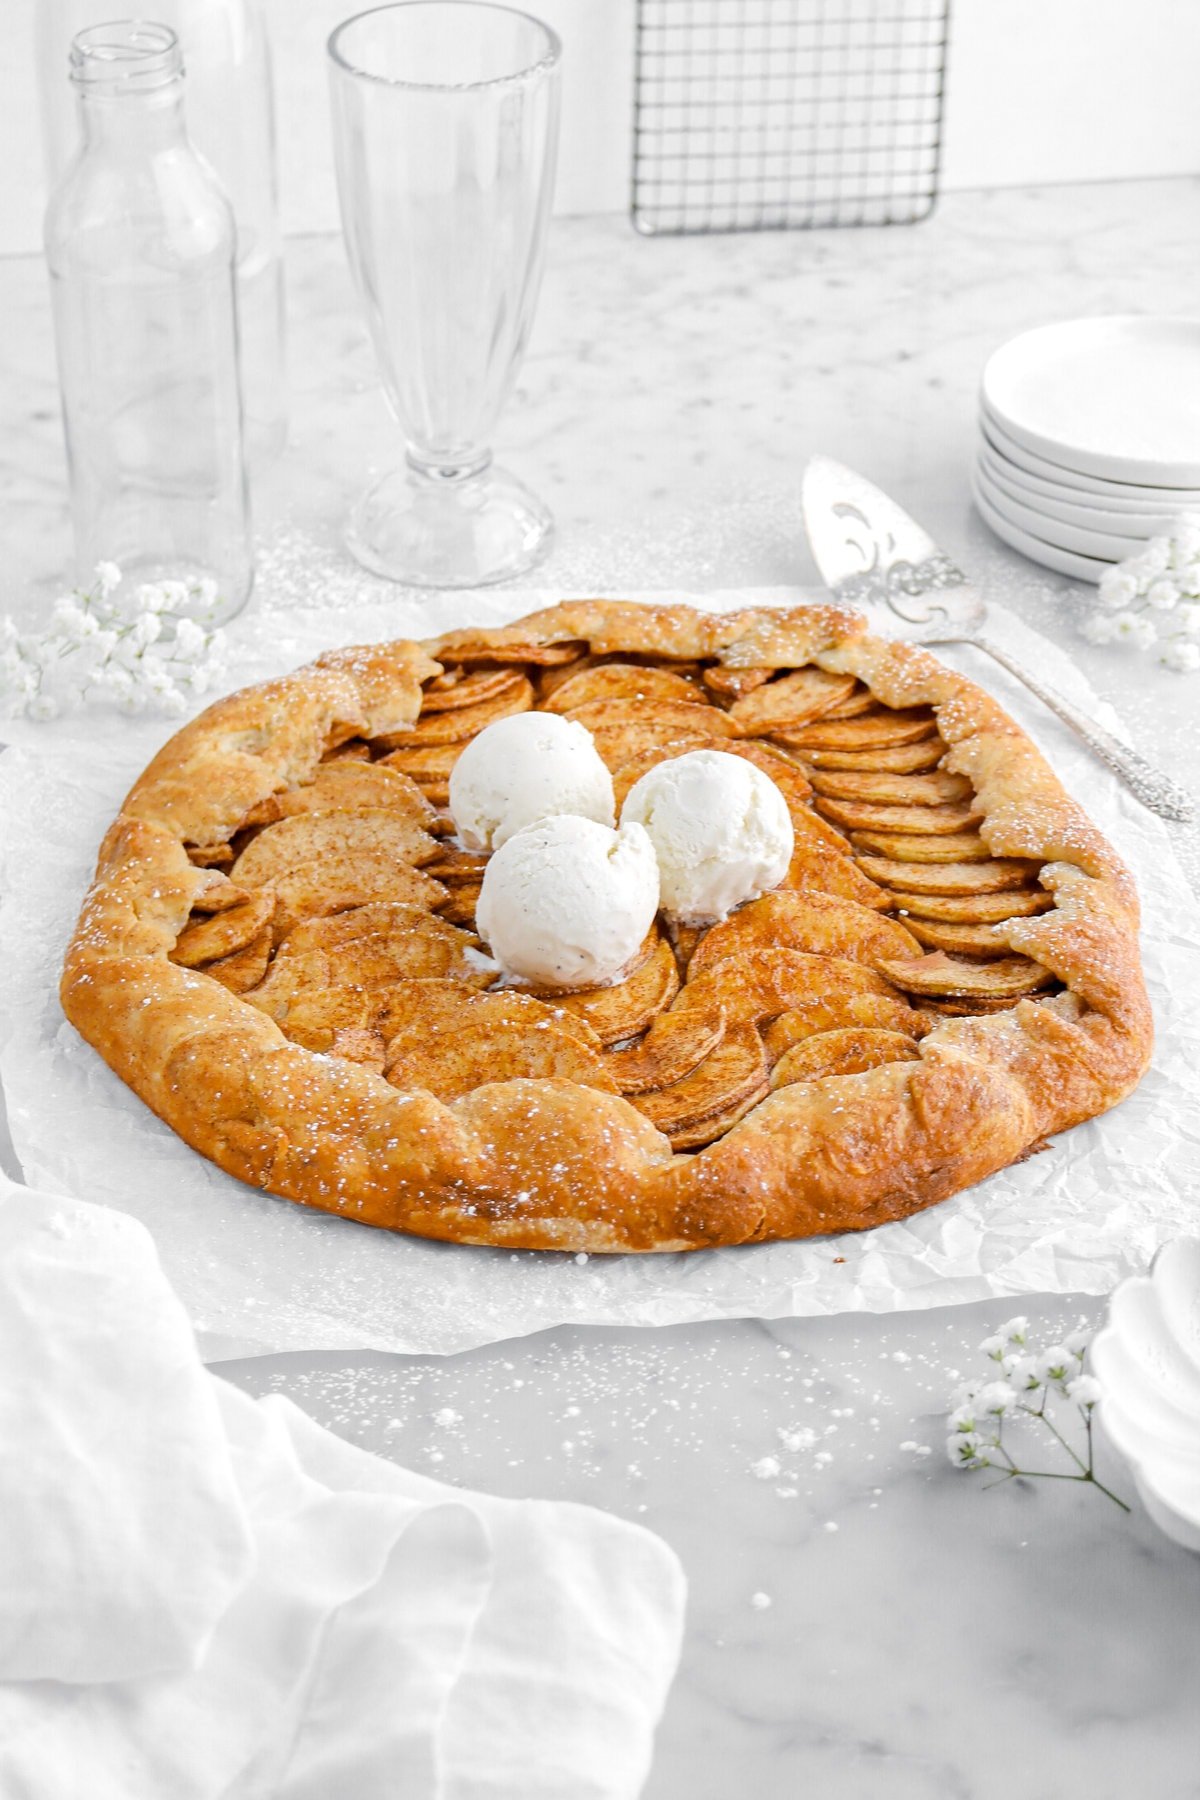 angled image of apple galette with three scoops of ice cream on top.